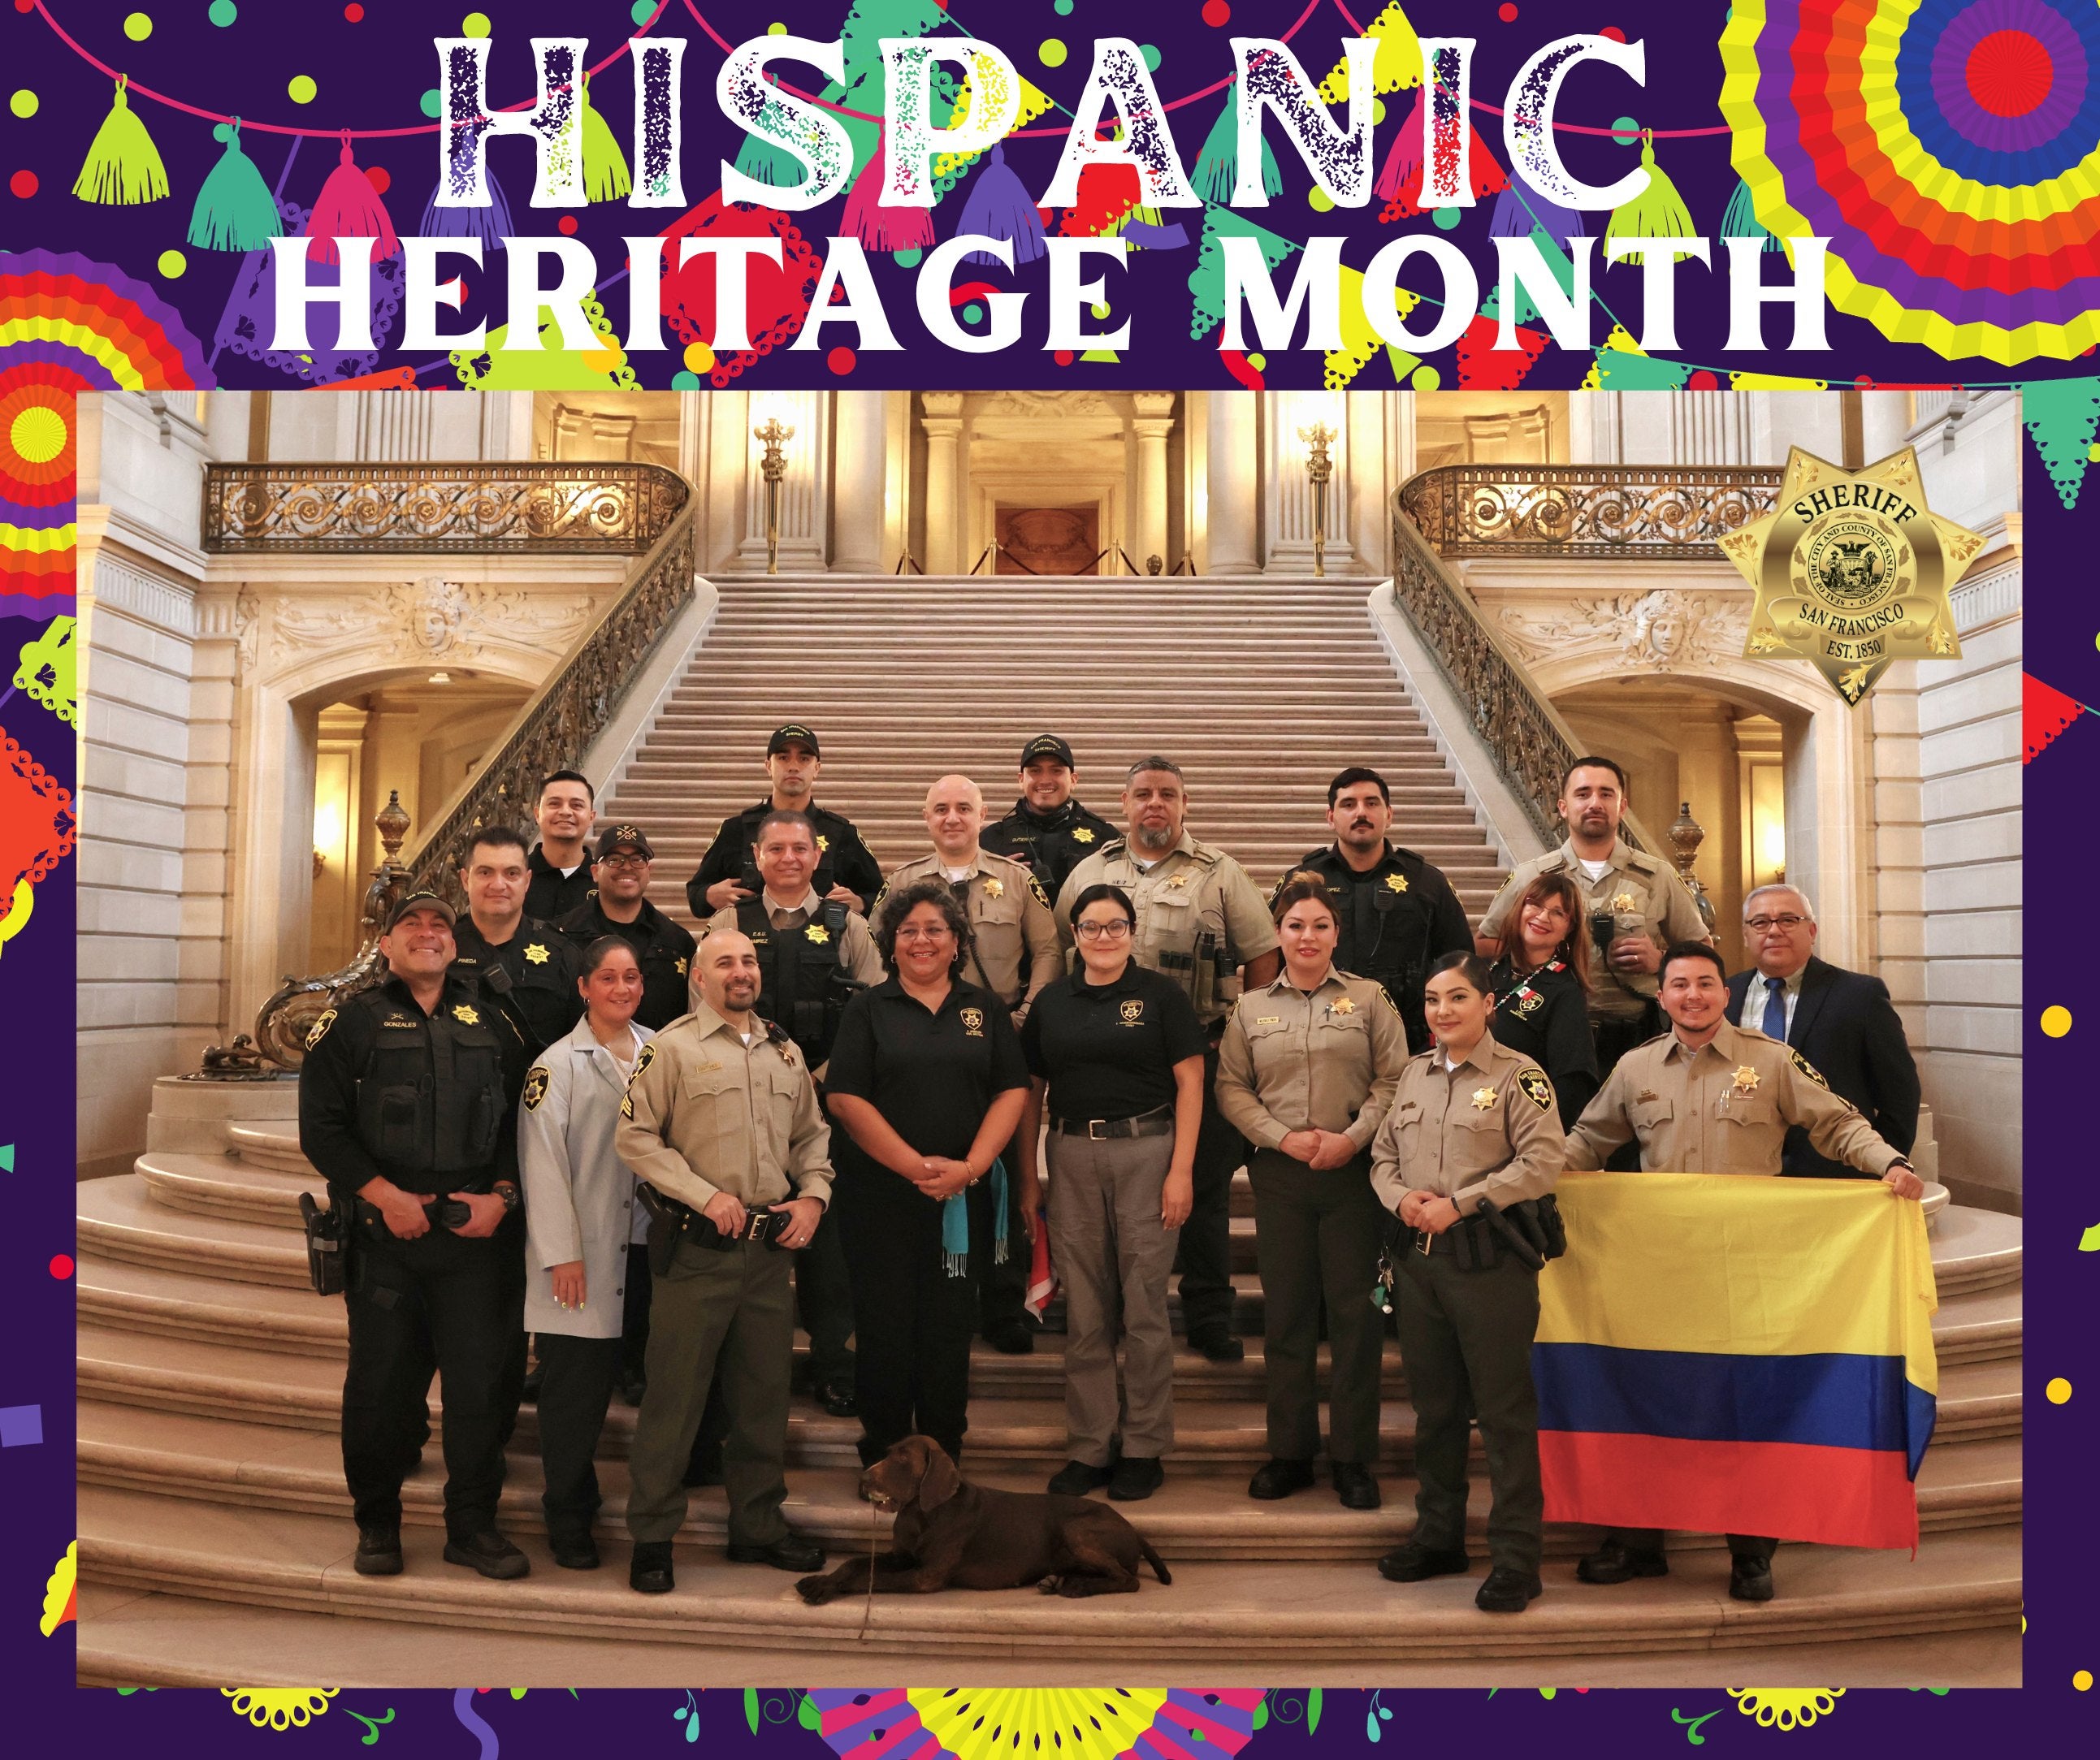 The San Francisco Sheriff’s Office wishes you a Happy Hispanic Heritage Month! Almost a quarter of our staff are Latino, many of whom are bilingual certified. We appreciate all you do and have done for our community.